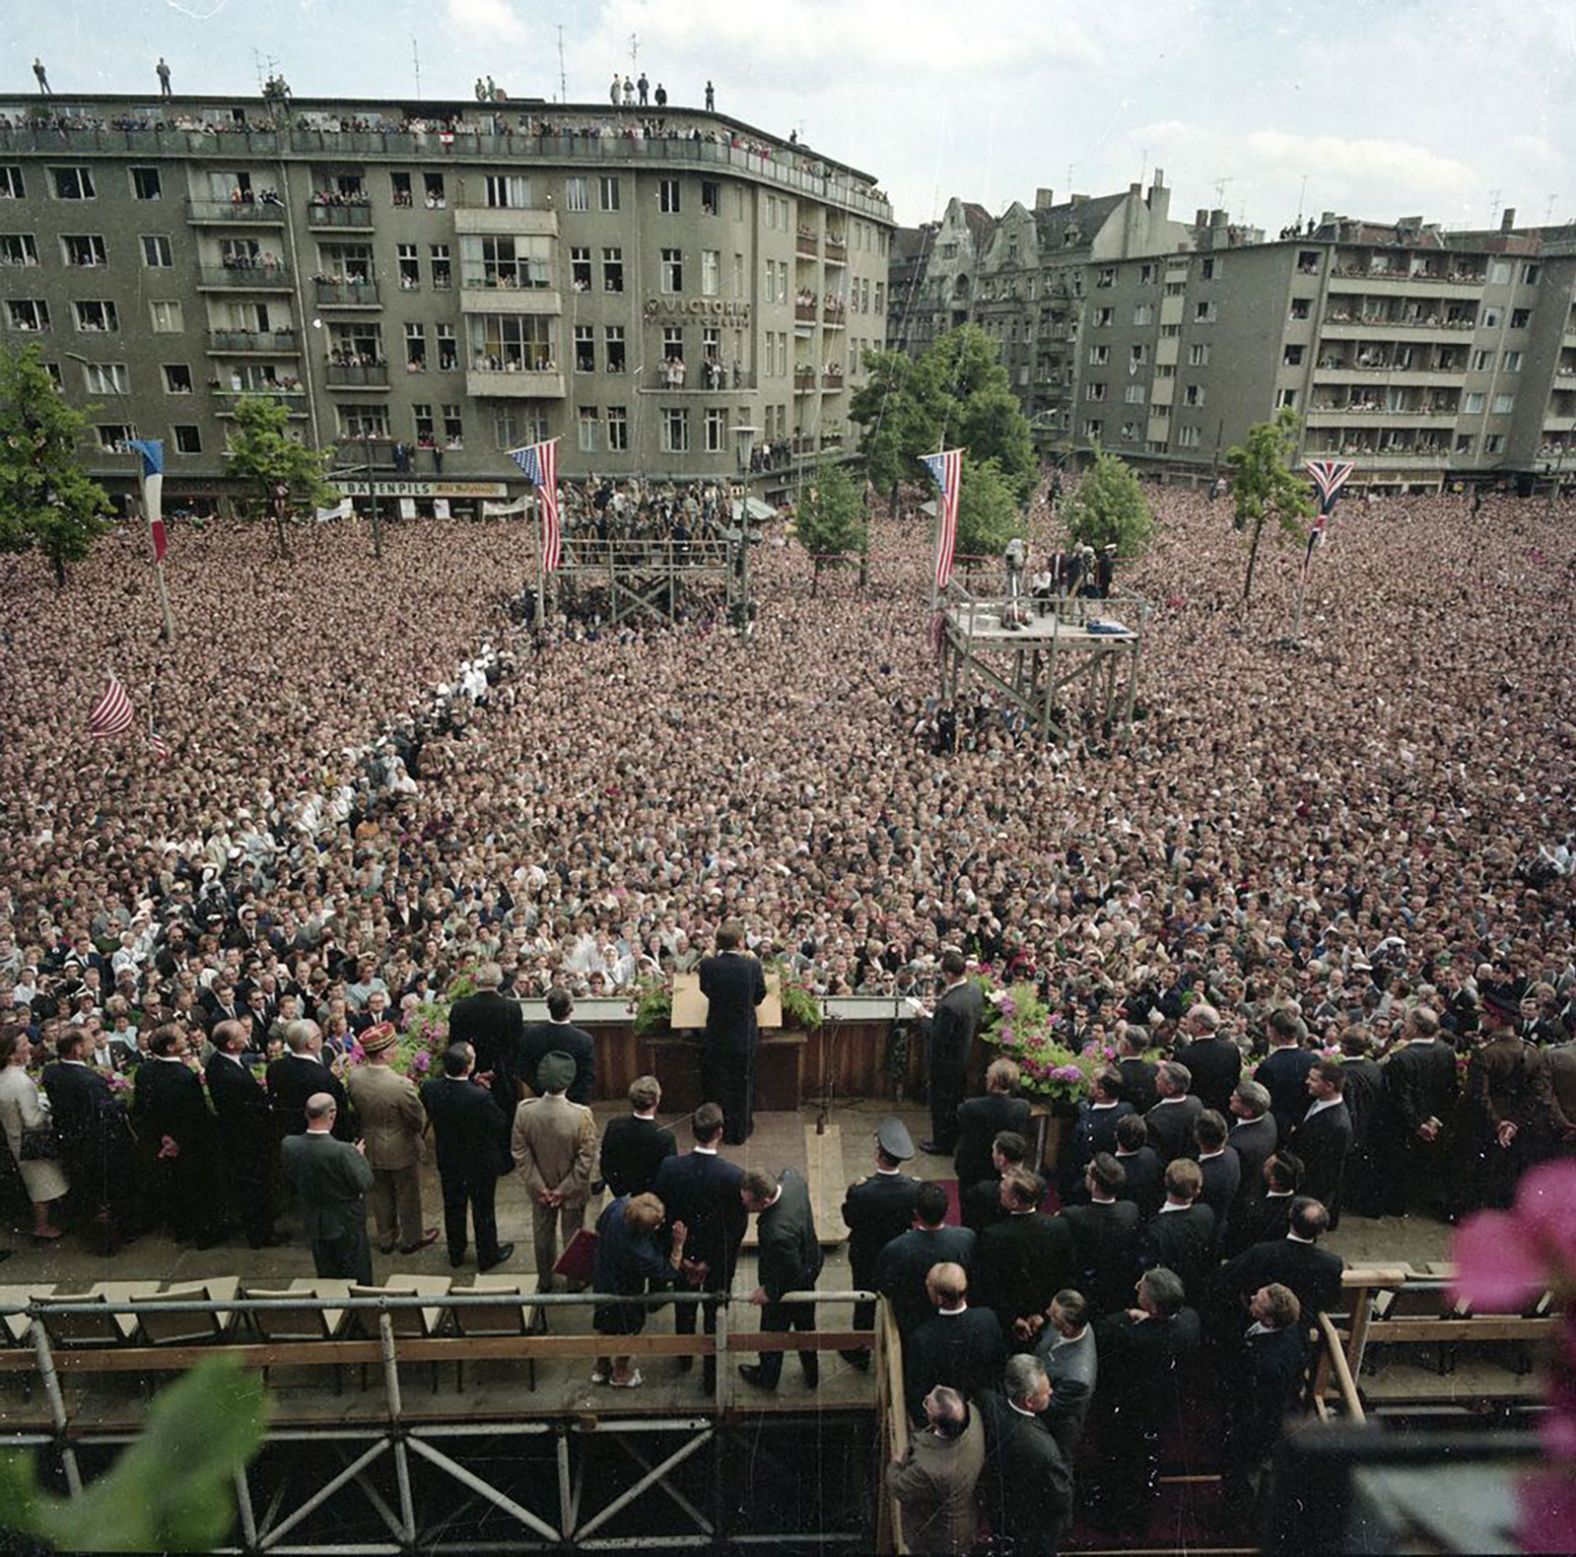 Kennedy delivers remarks to a crowd in West Berlin, West Germany, in June 1963. He spoke about his hopes for the reunification of Germany. "All free men, wherever they may live, are citizens of Berlin," he said. "And therefore, as a free man, I take pride in the words 'Ich bin ein Berliner.'"